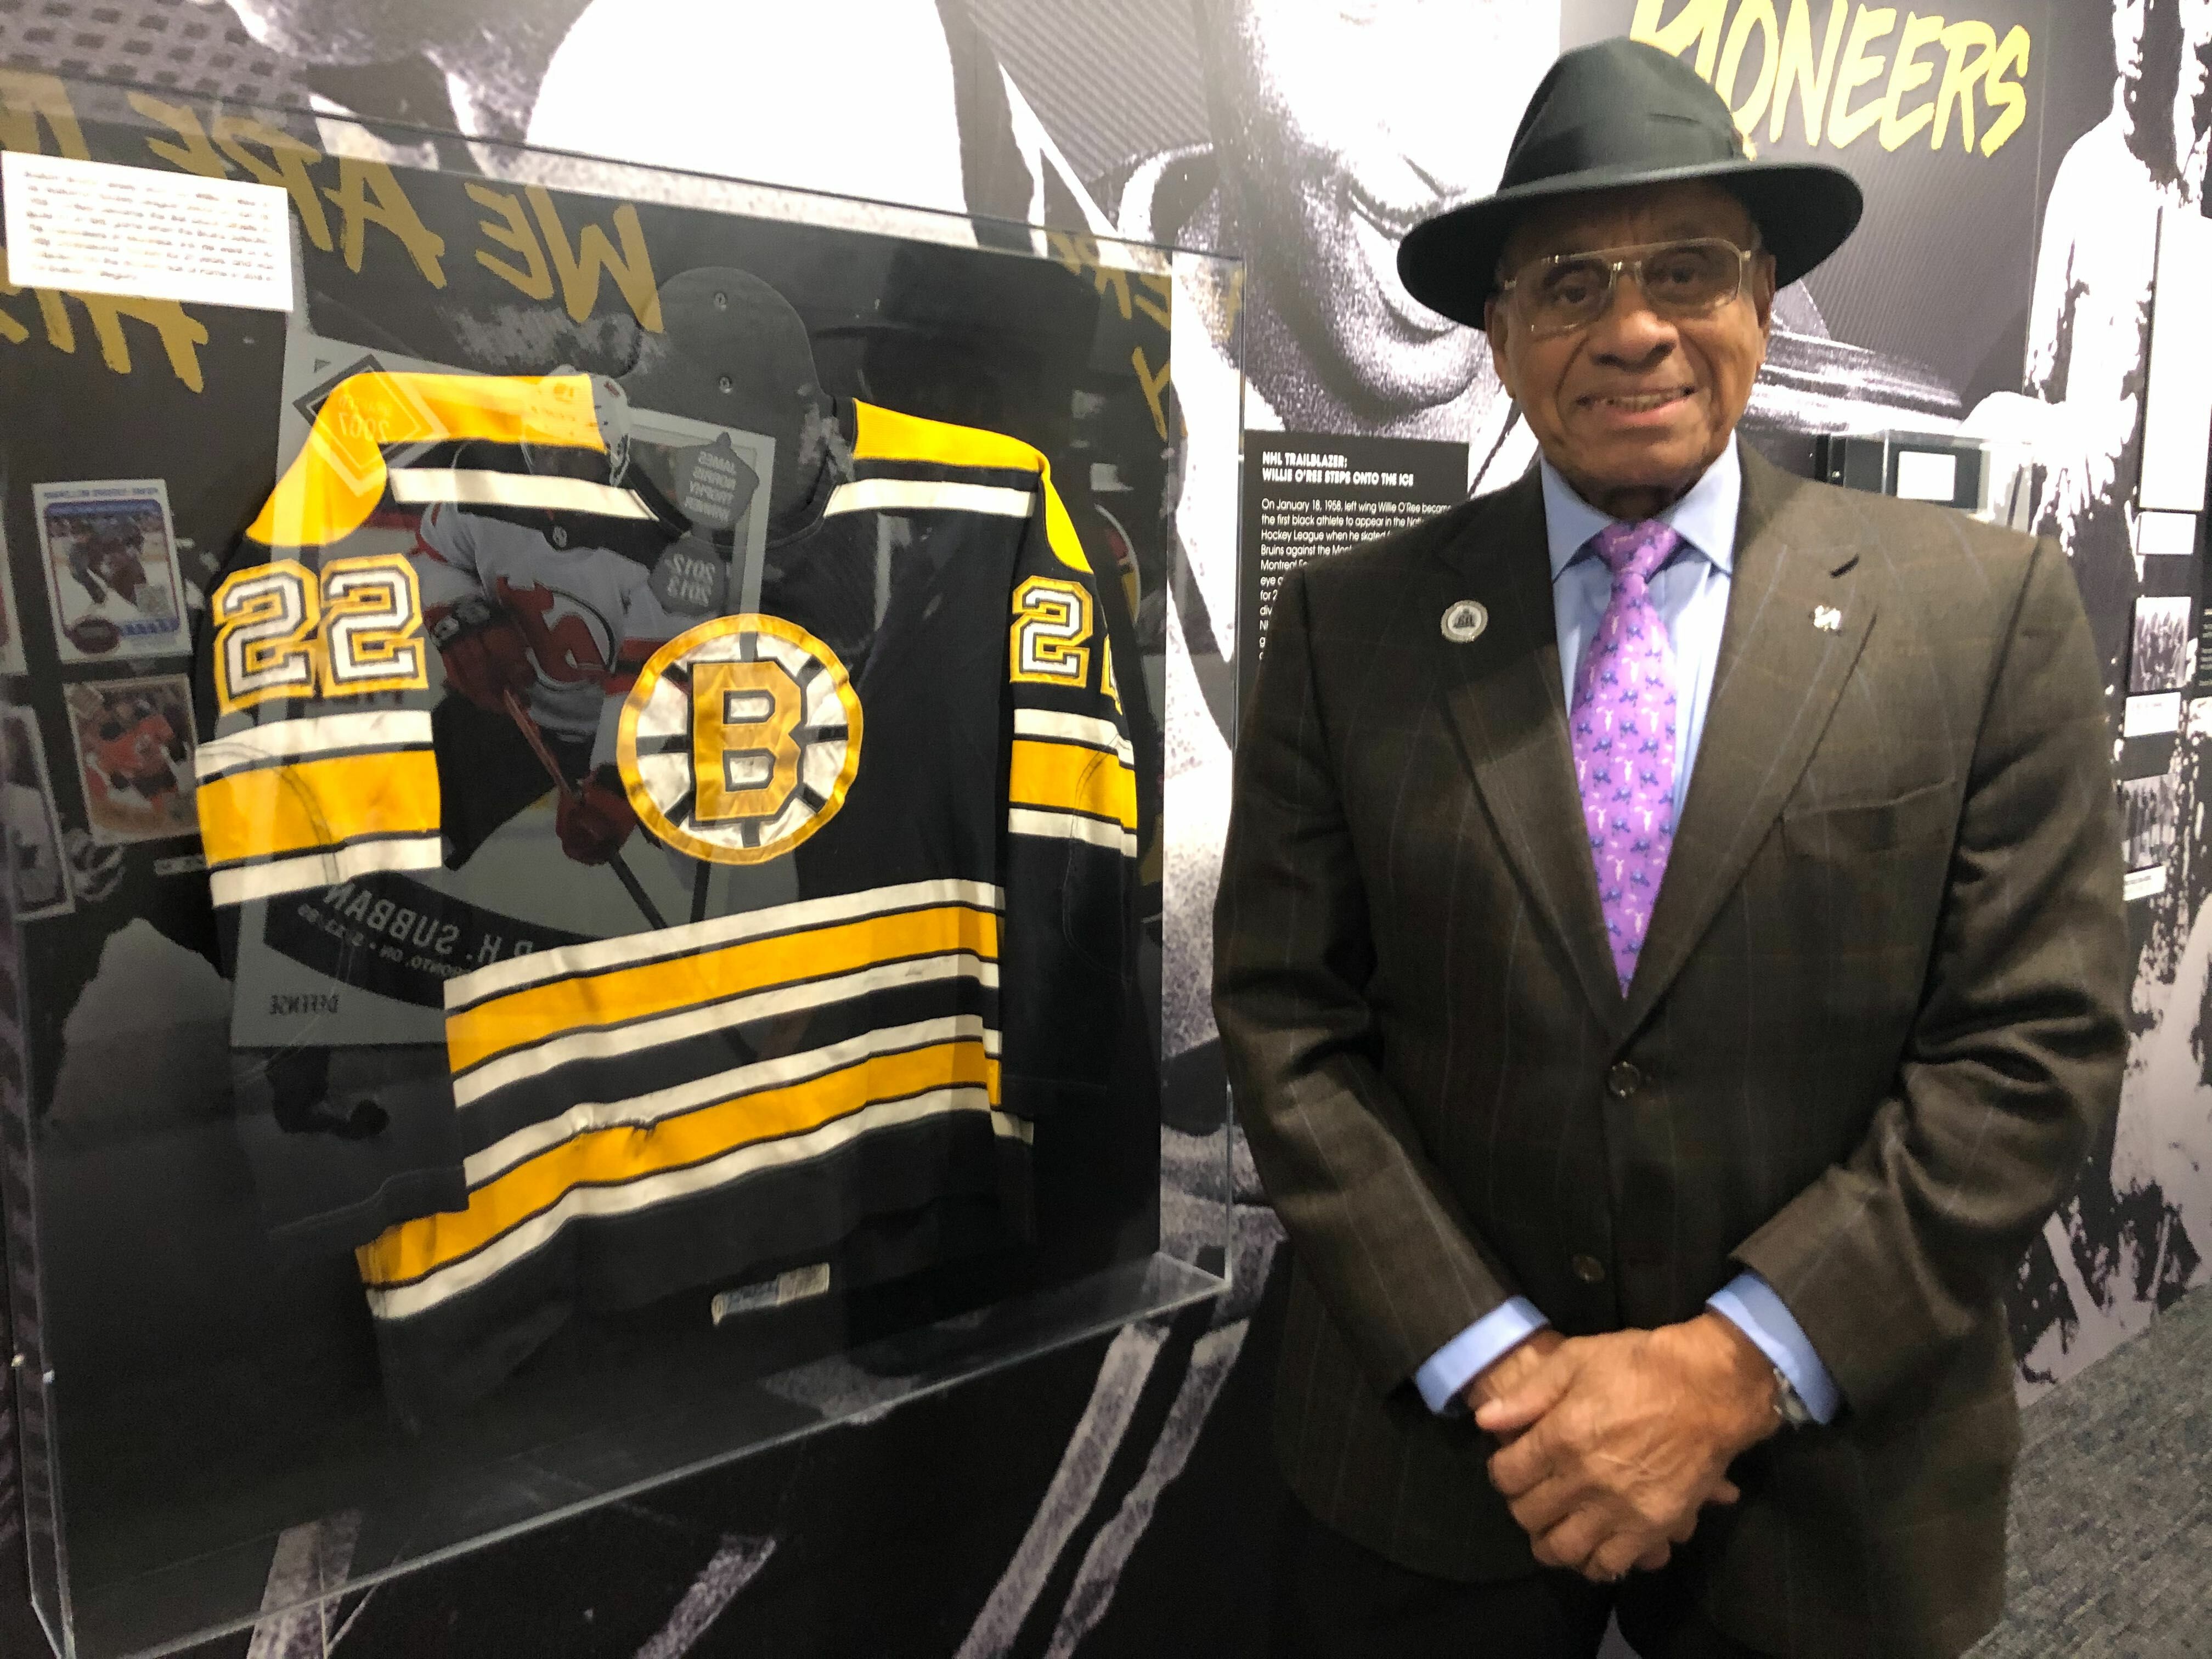 Boston Bruins retire jersey of Willie O'Ree, NHL's first black player